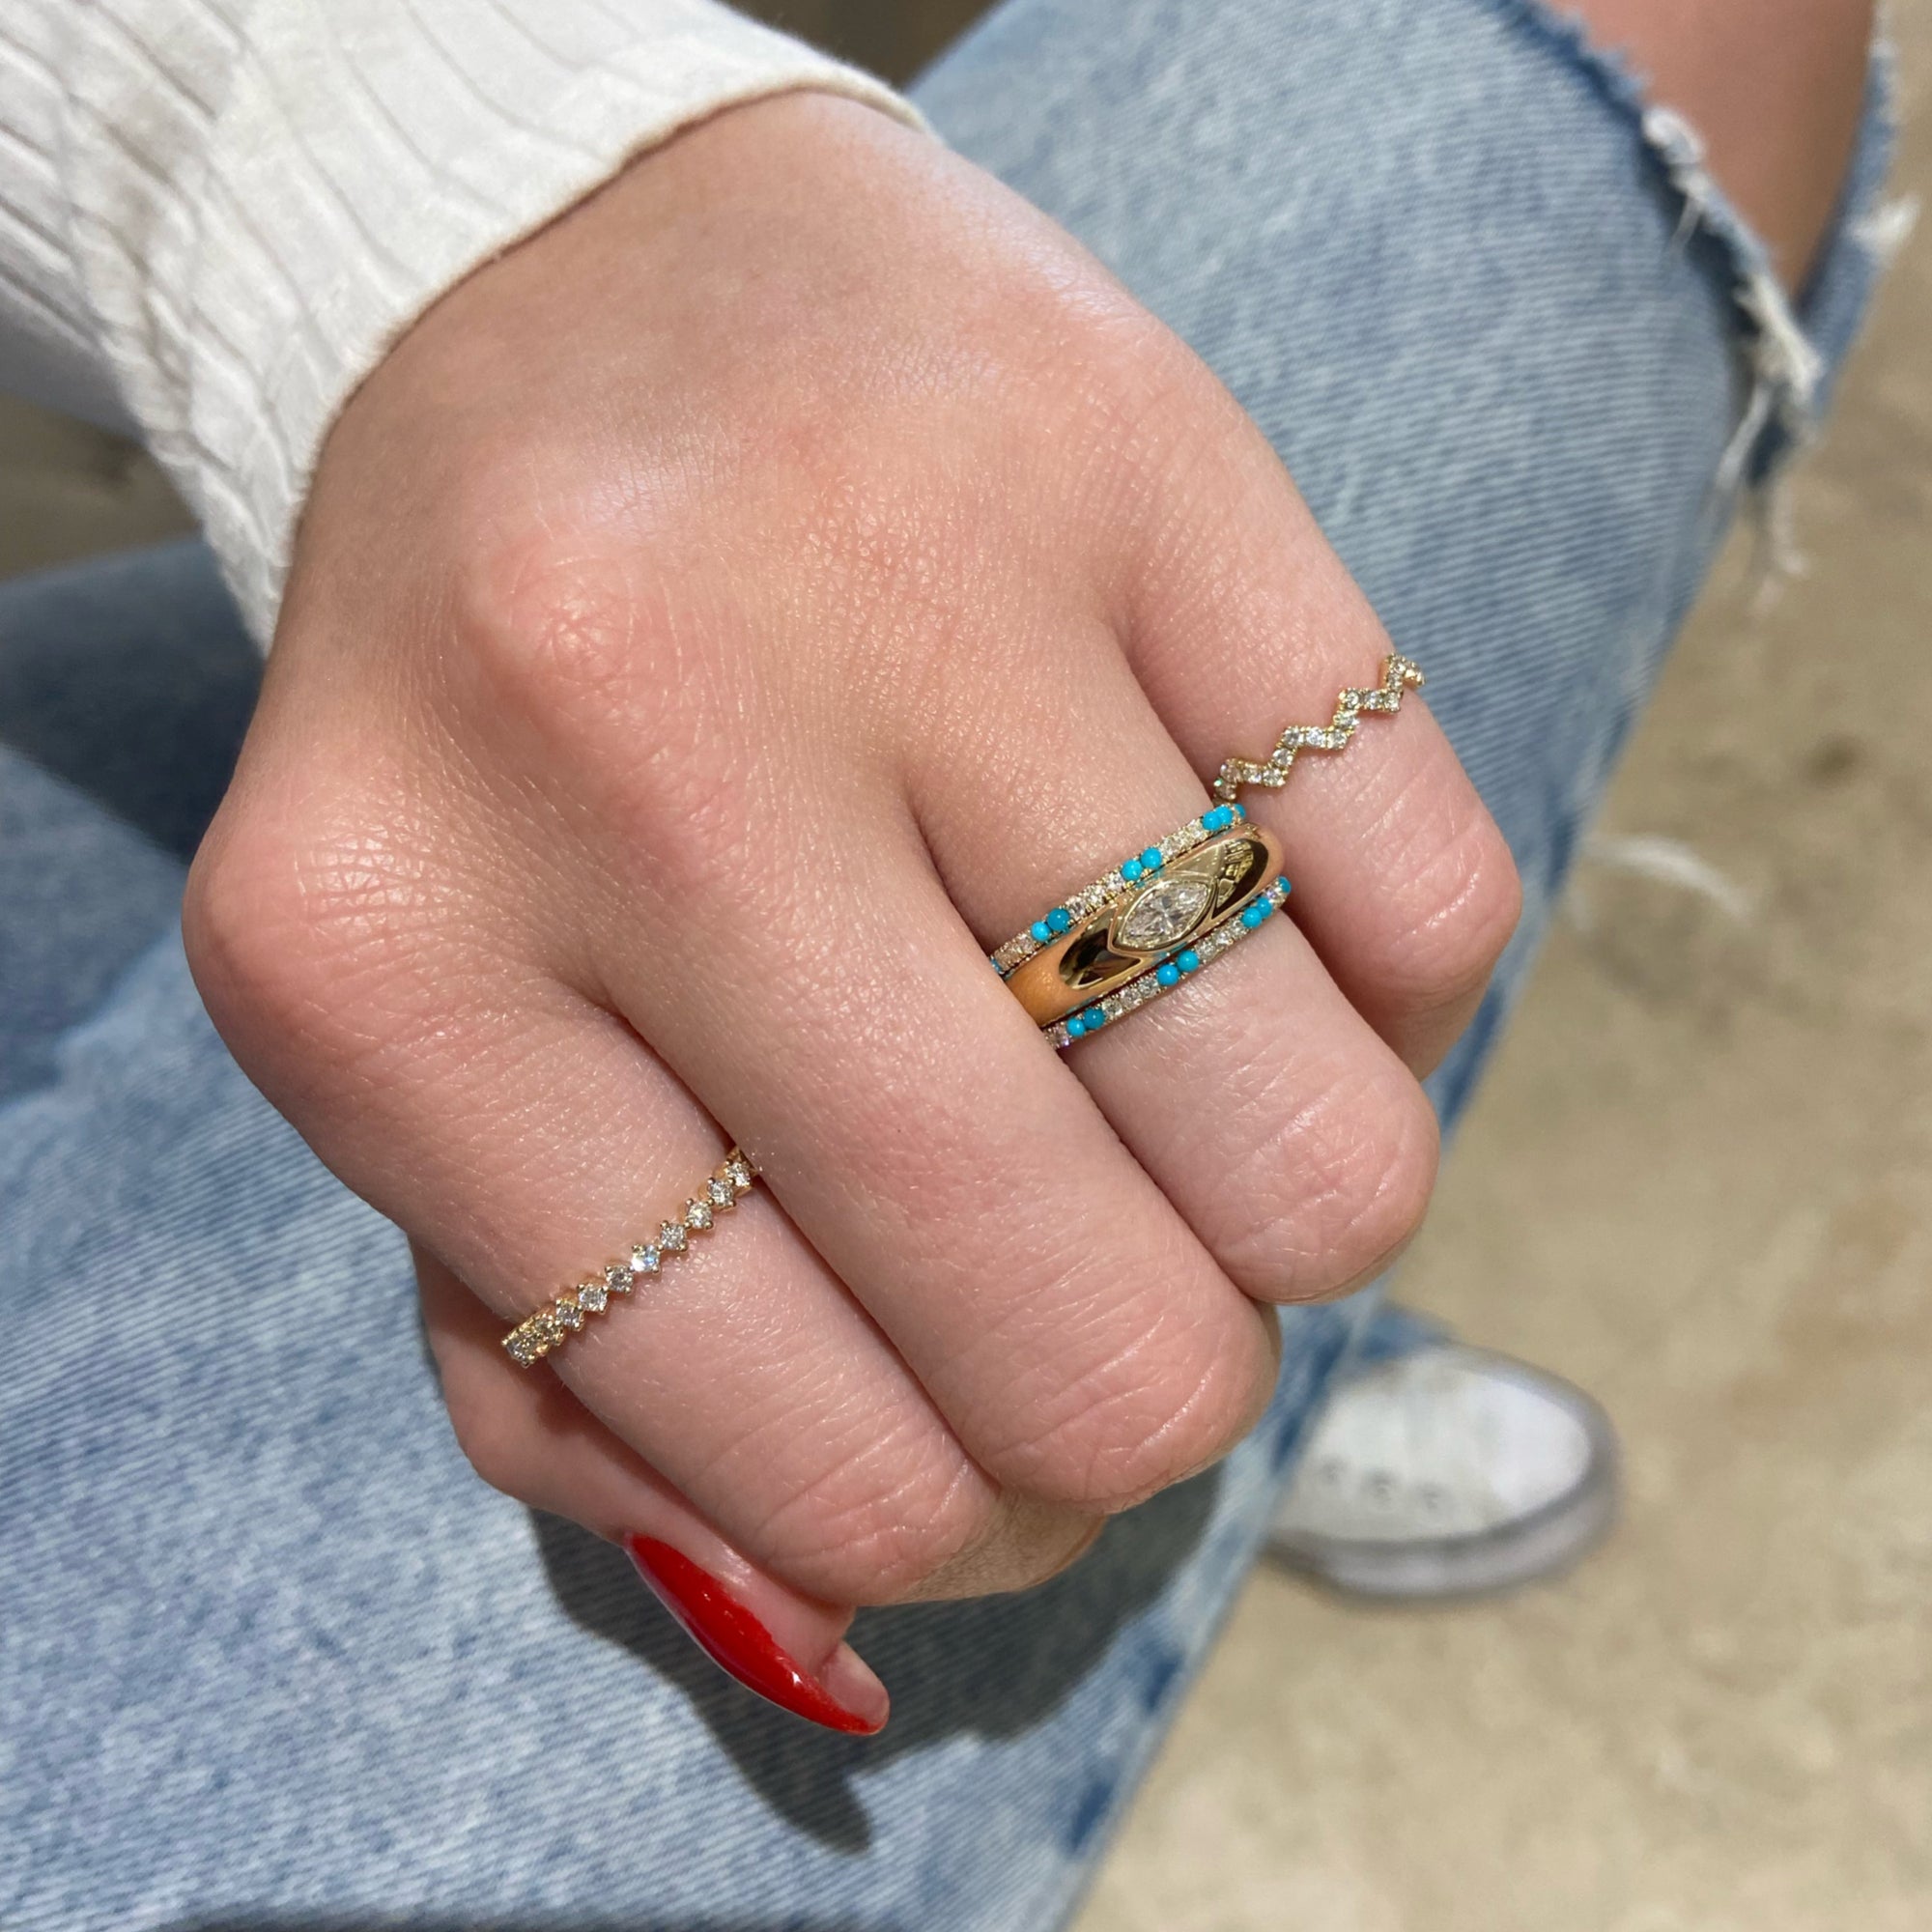 Turquoise & Diamond Stackable Ring - 14K gold weighing 0.67 grams  - 27 round diamonds weighing 0.20 carats  - 18 turquoise cabochons weighing 0.25 carats